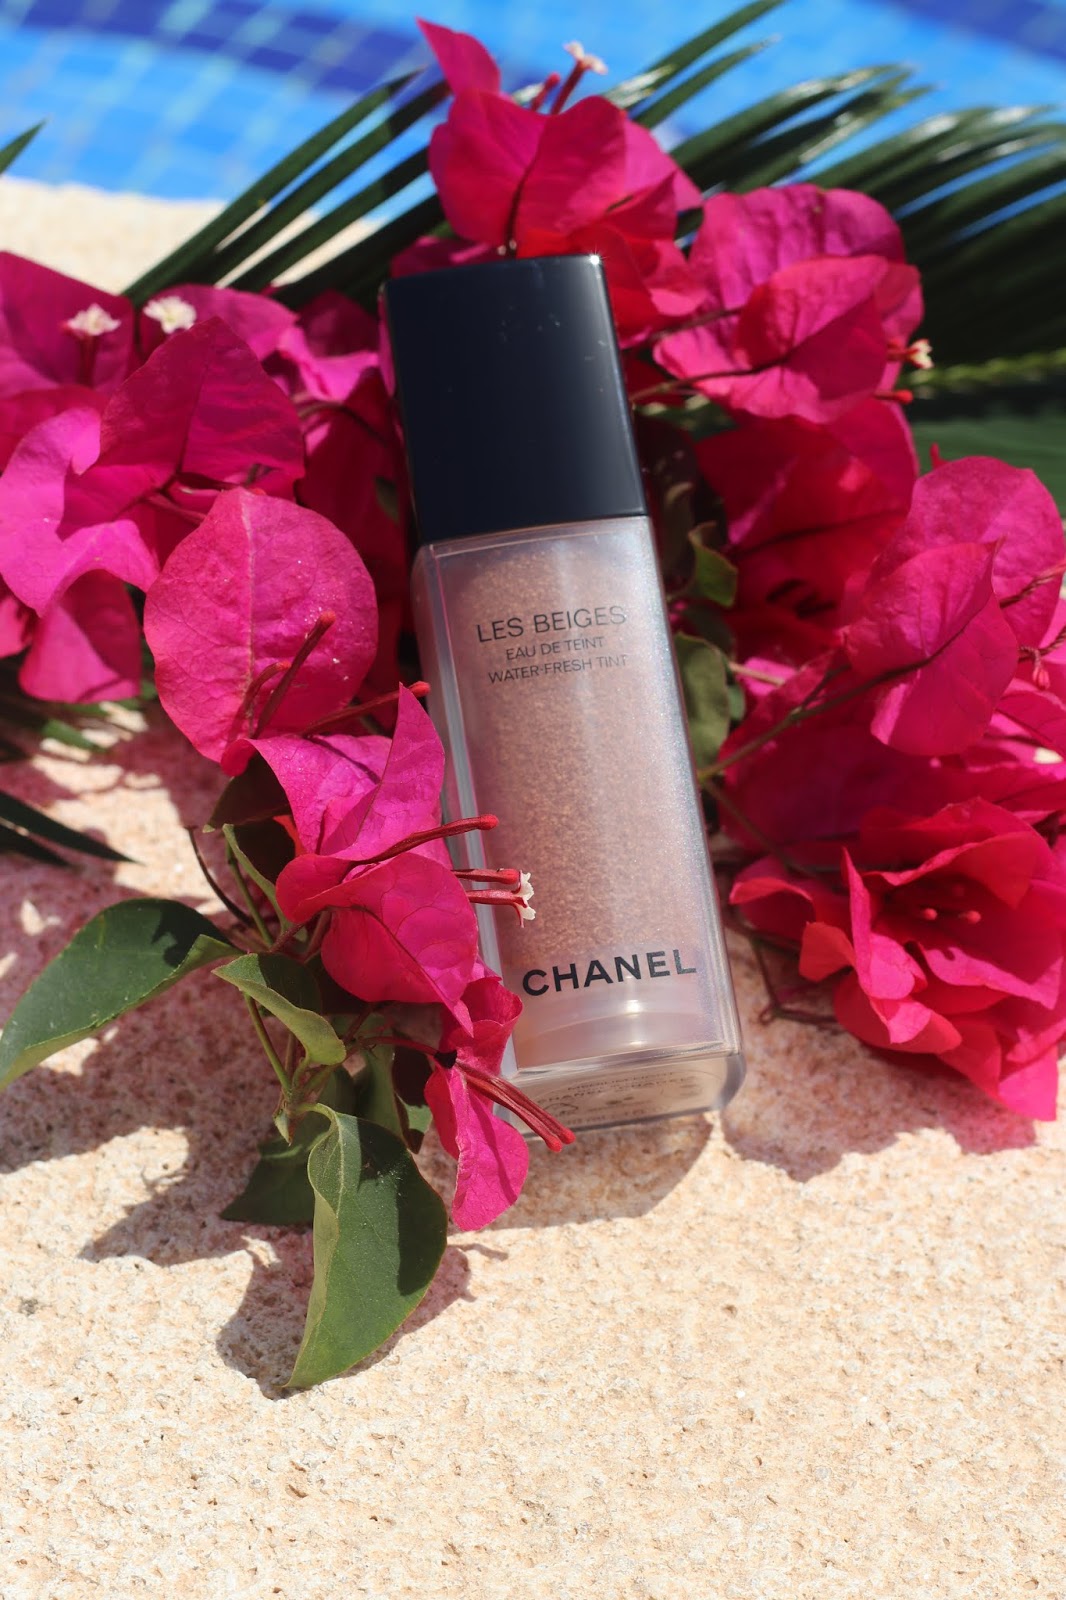 Review, Chanel Les Beiges Water-Fresh Tint